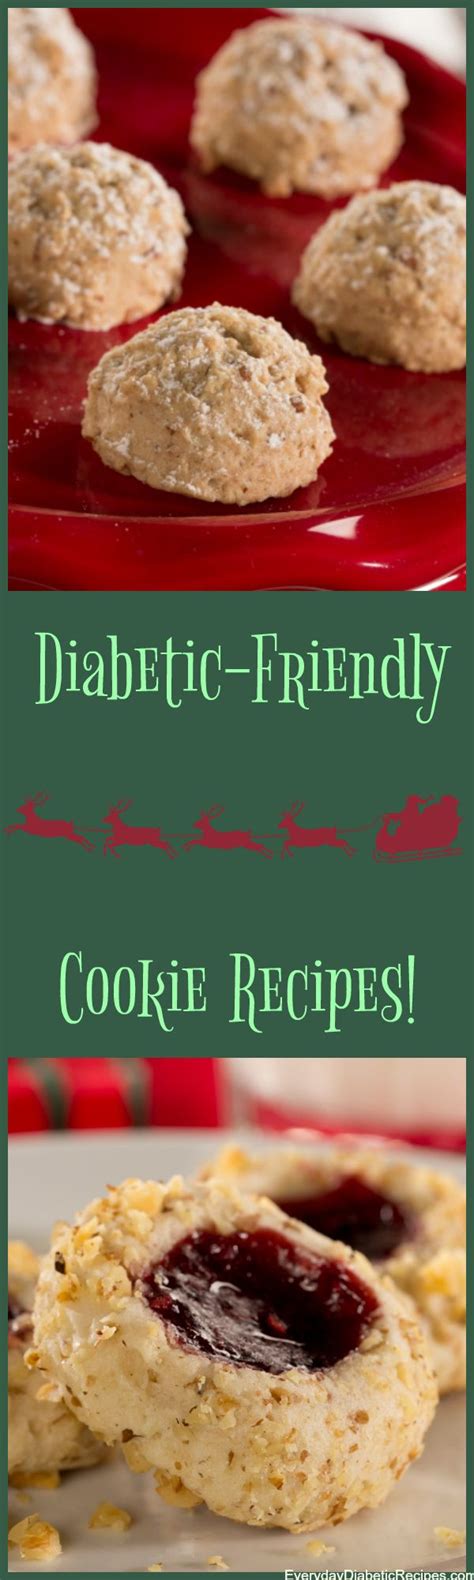 .cookies | diabetic living online / see more ideas about food, recipes, diabetic cookies. Diabetic Holiday Cookies - Diabetic Cookies for Me: #12 Healthy Sugar-Free Christmas ... / I'm ...